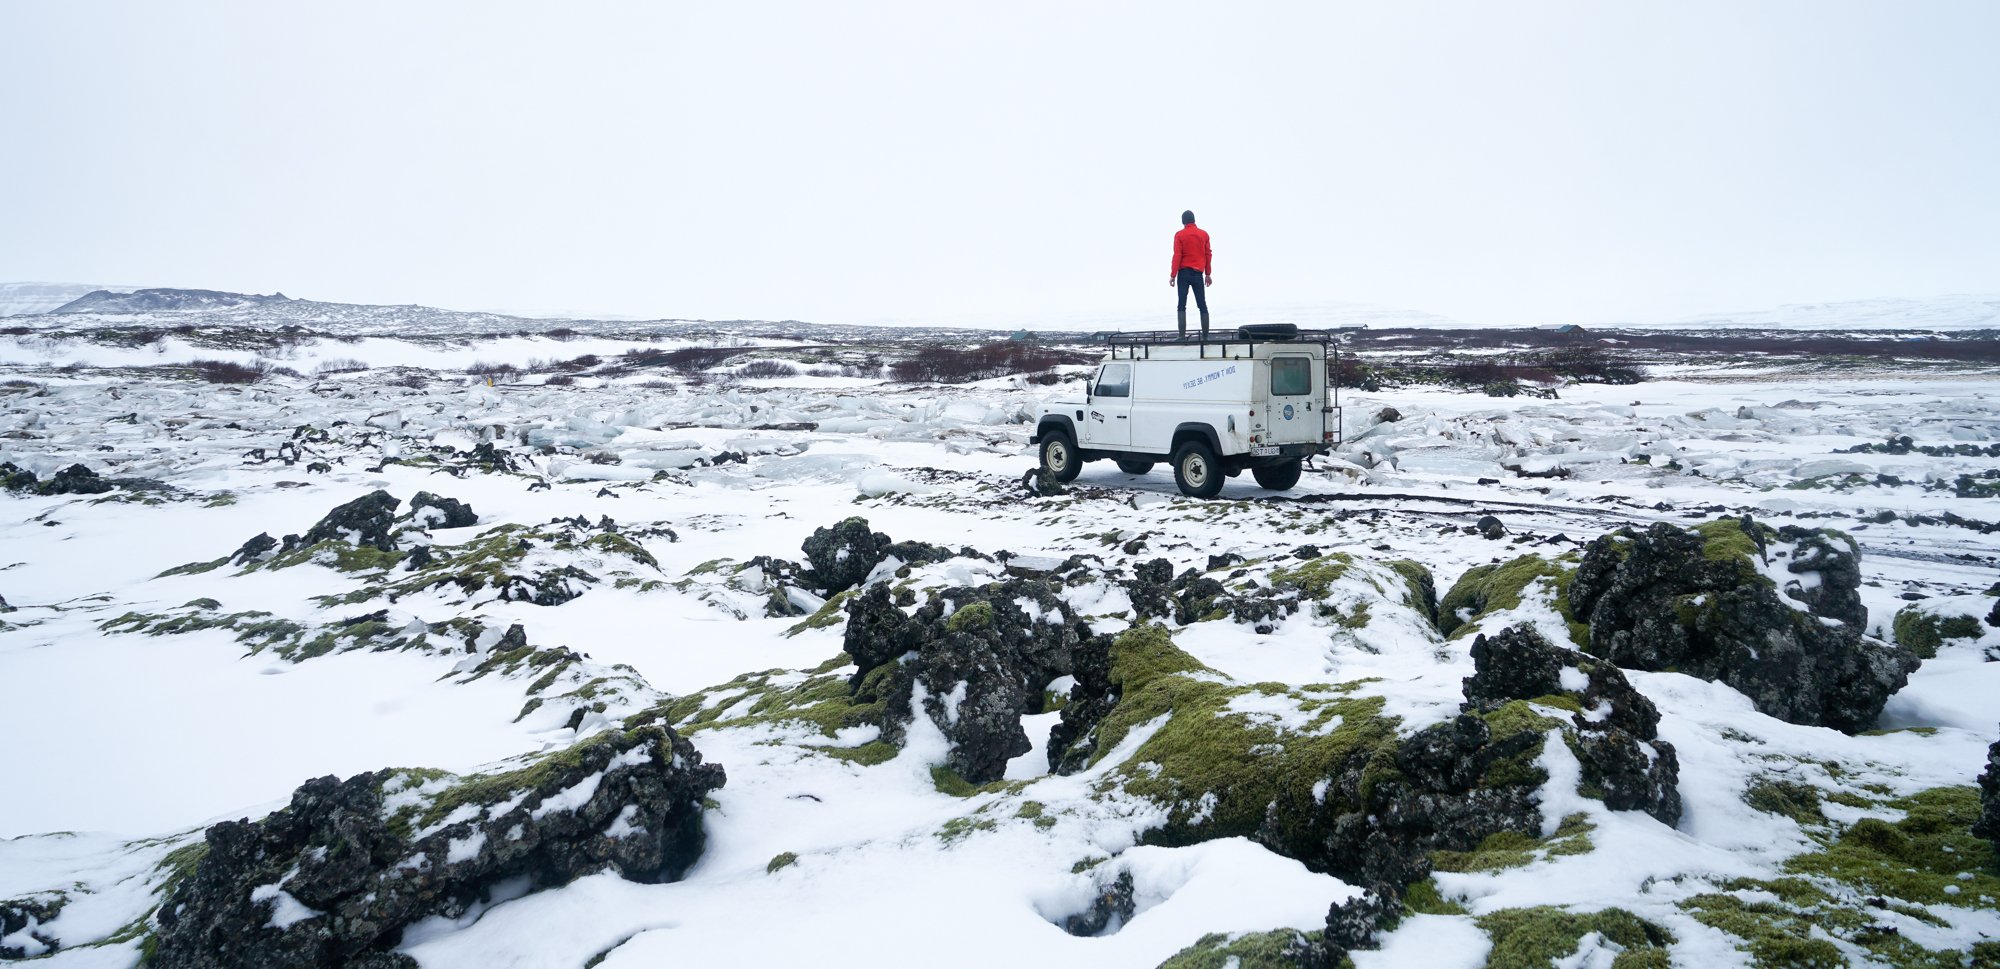 My second Iceland trip with Kuku Campers! 1